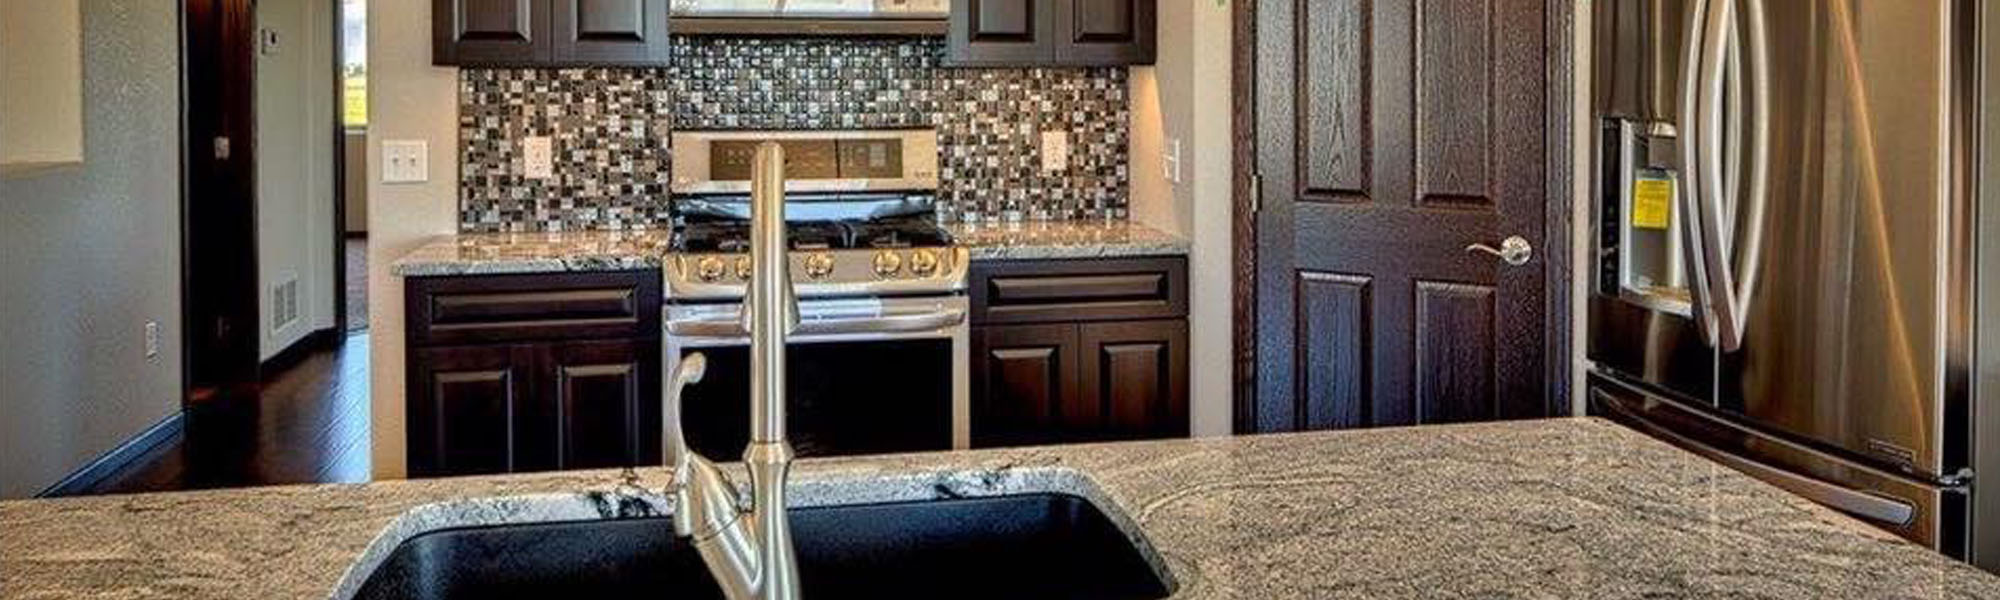 Kitchen with newly installed grey granite countertops.